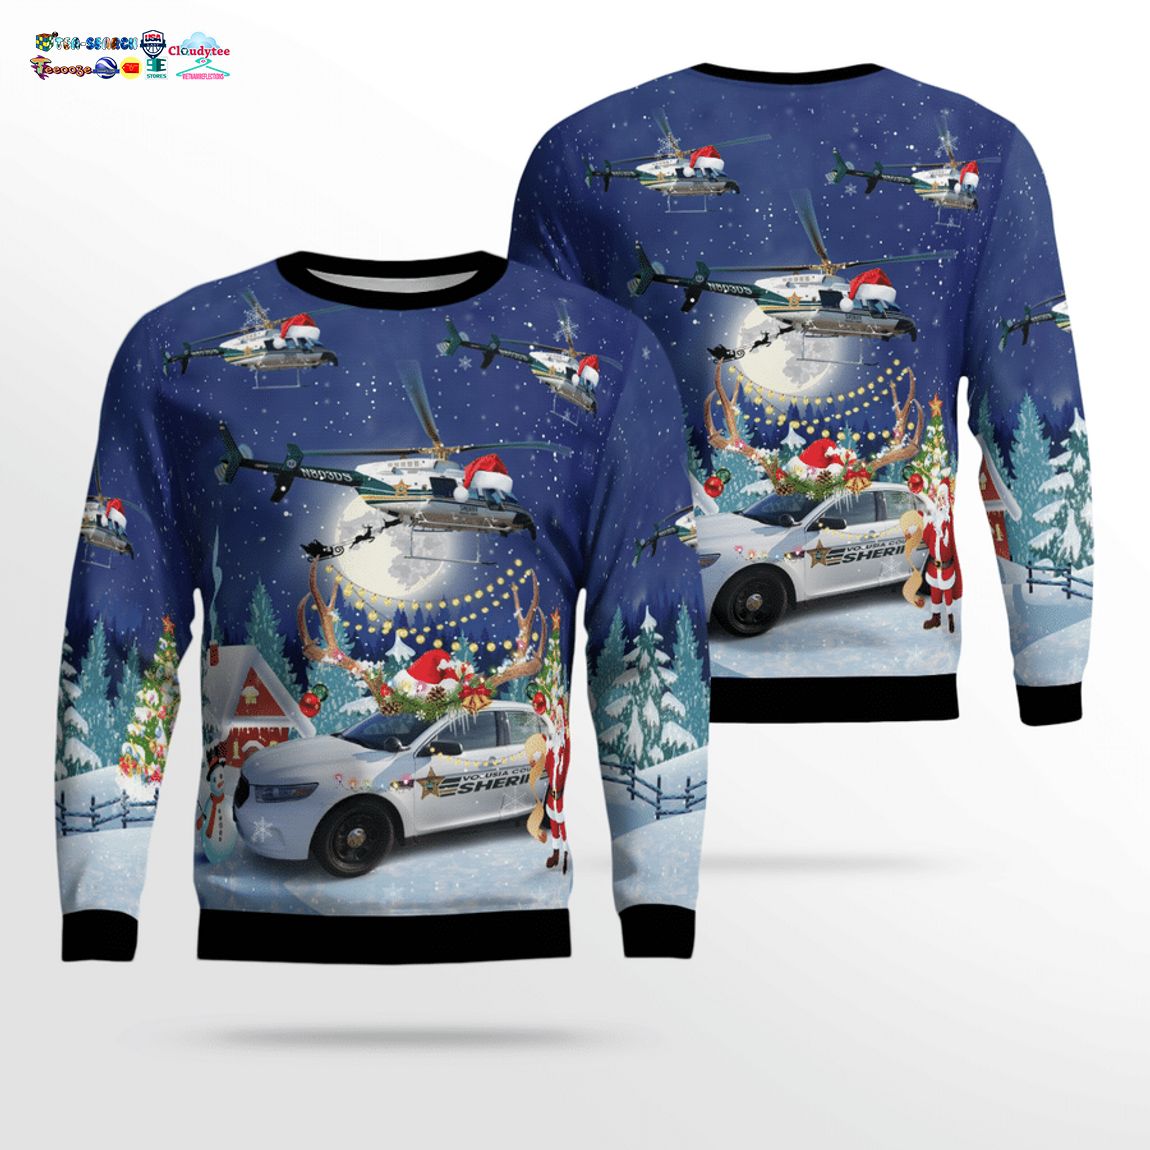 Volusia County Sheriff Bell 407 And Ford Police Interceptor 3D Christmas Sweater